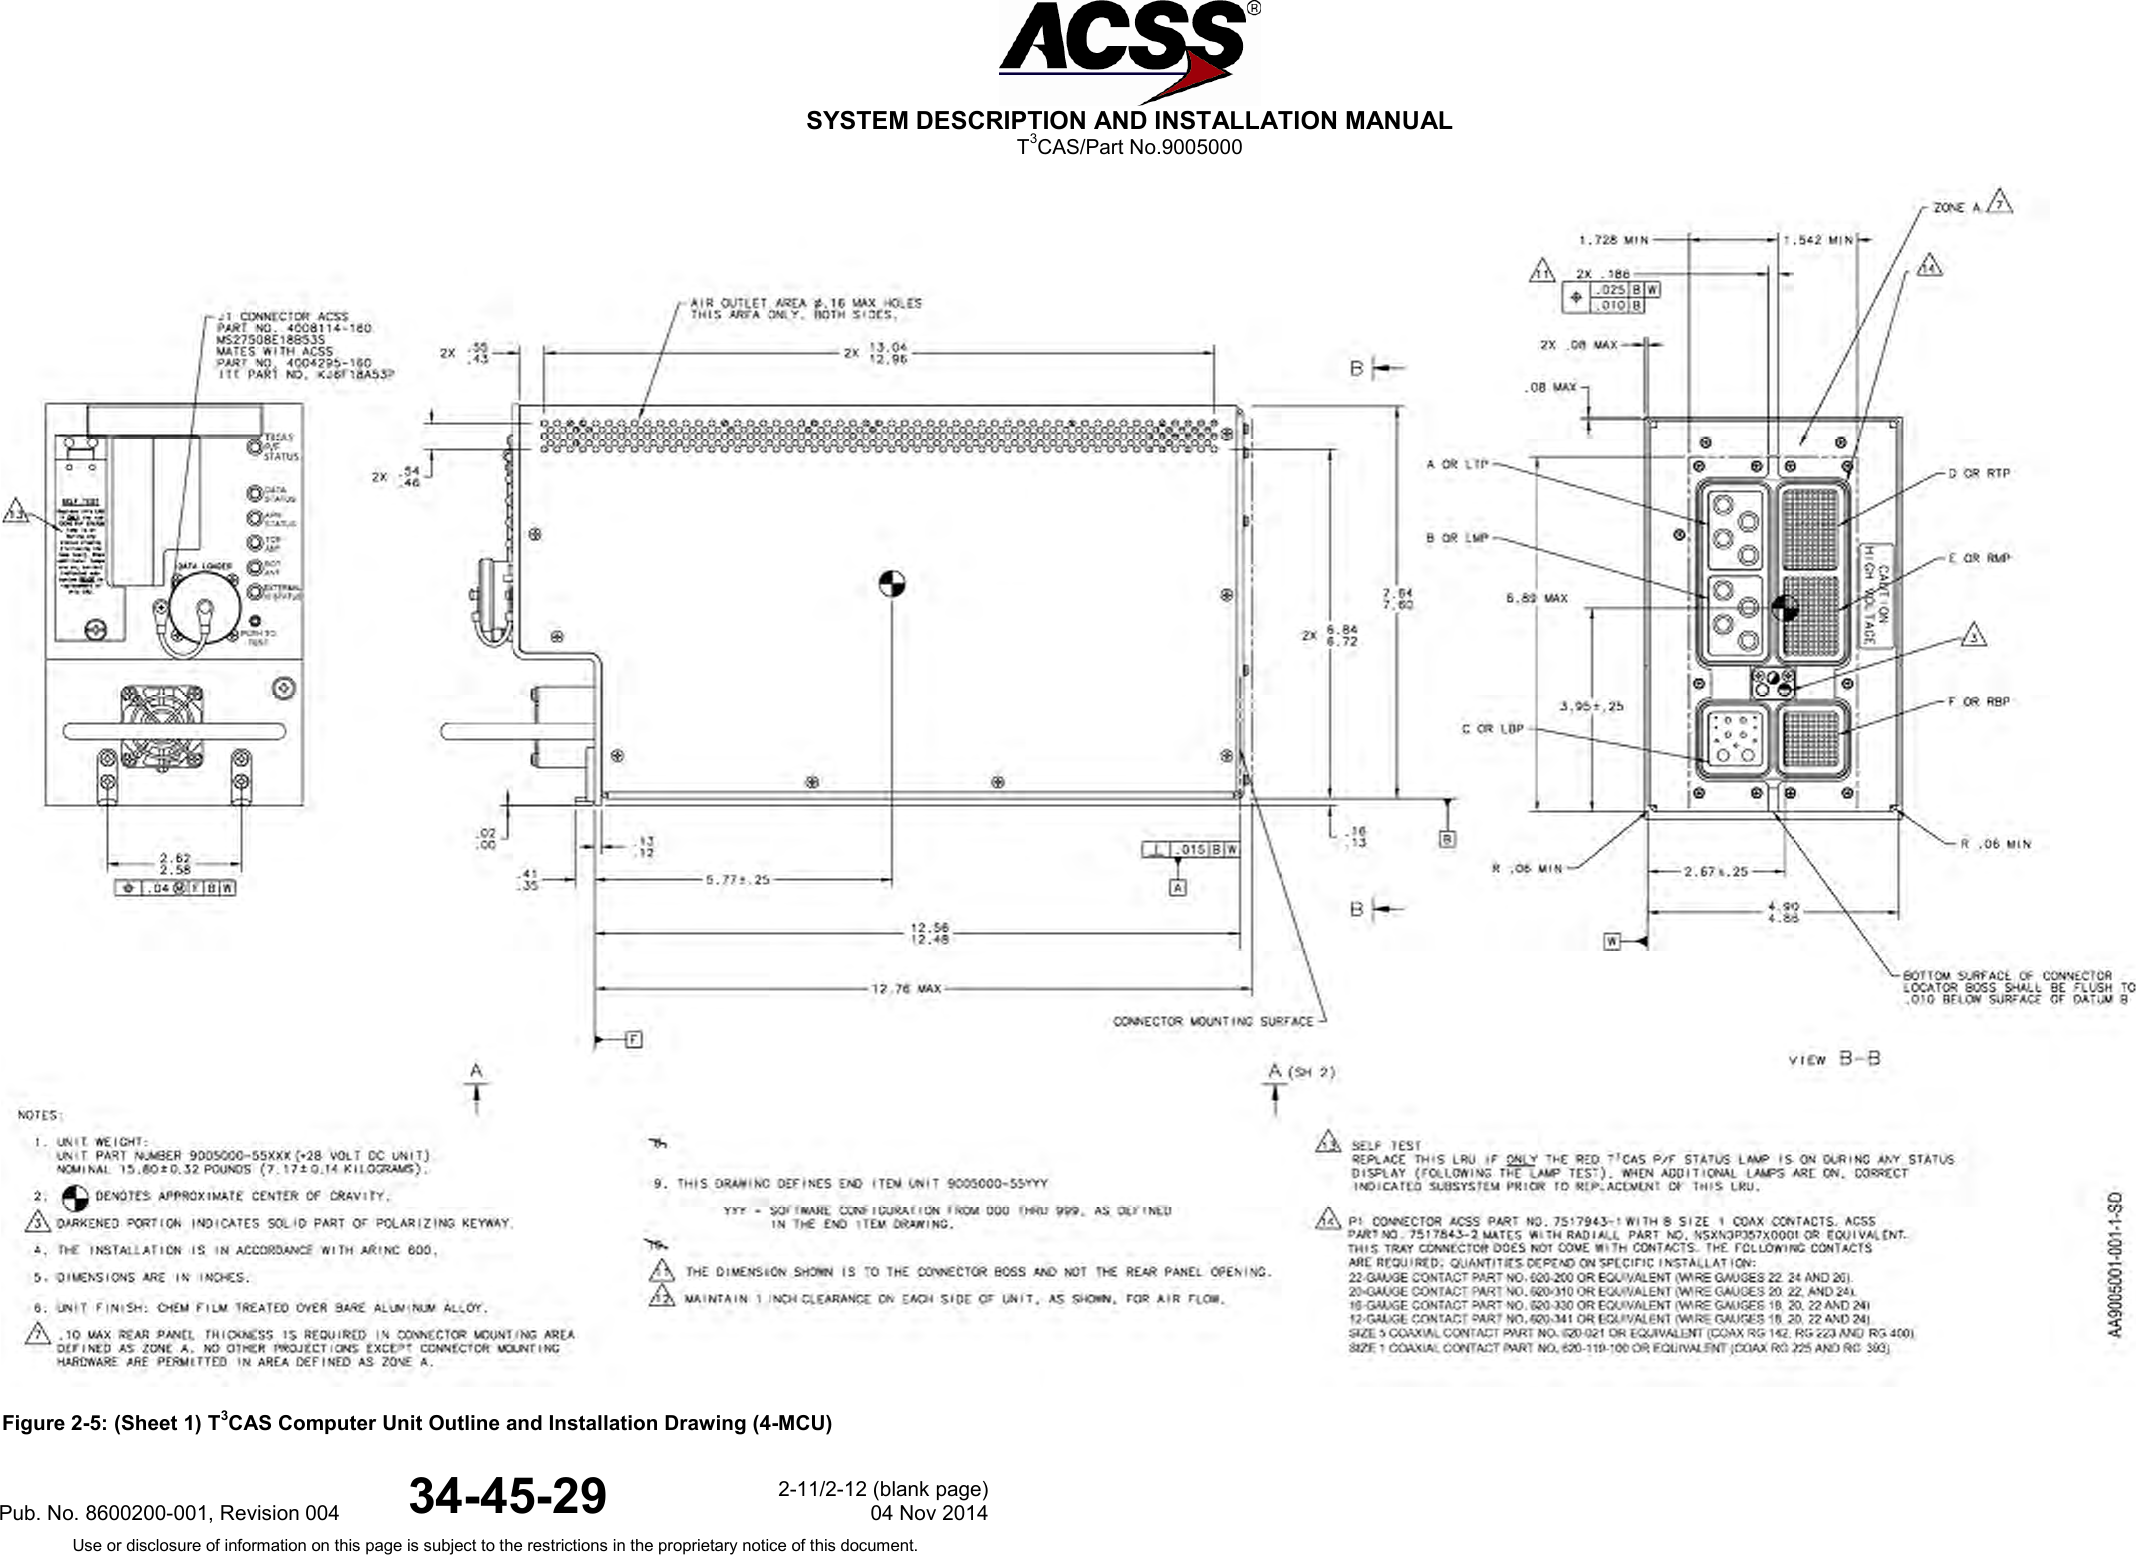  SYSTEM DESCRIPTION AND INSTALLATION MANUAL T3CAS/Part No.9005000  Figure 2-5: (Sheet 1) T3CAS Computer Unit Outline and Installation Drawing (4-MCU) Pub. No. 8600200-001, Revision 004 34-45-29 2-11/2-12 (blank page) 04 Nov 2014 Use or disclosure of information on this page is subject to the restrictions in the proprietary notice of this document.  